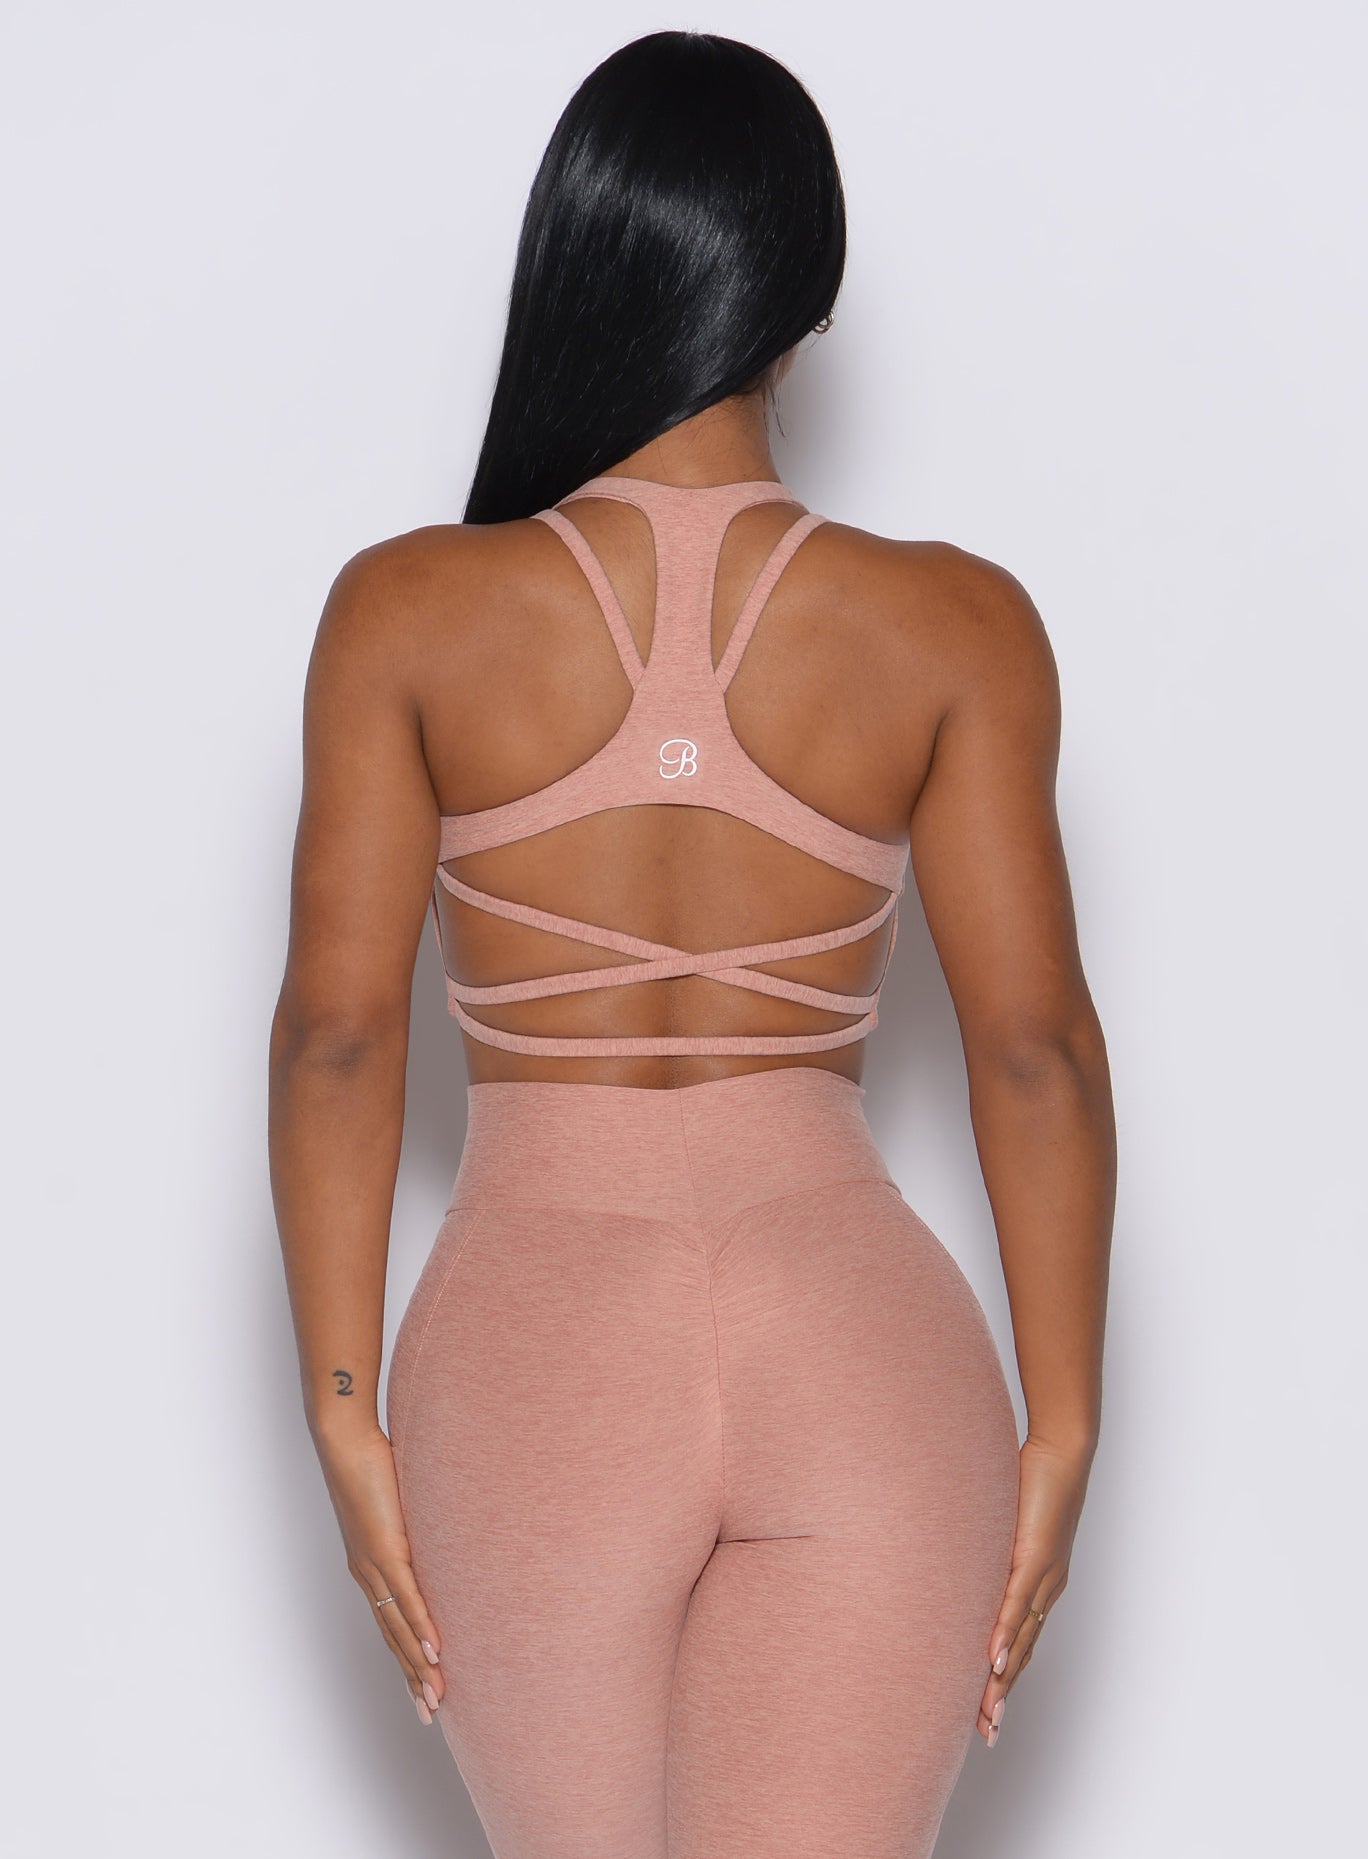 back profile picture of a model wearing our viral tank bra in nude sand color along with the matching leggings